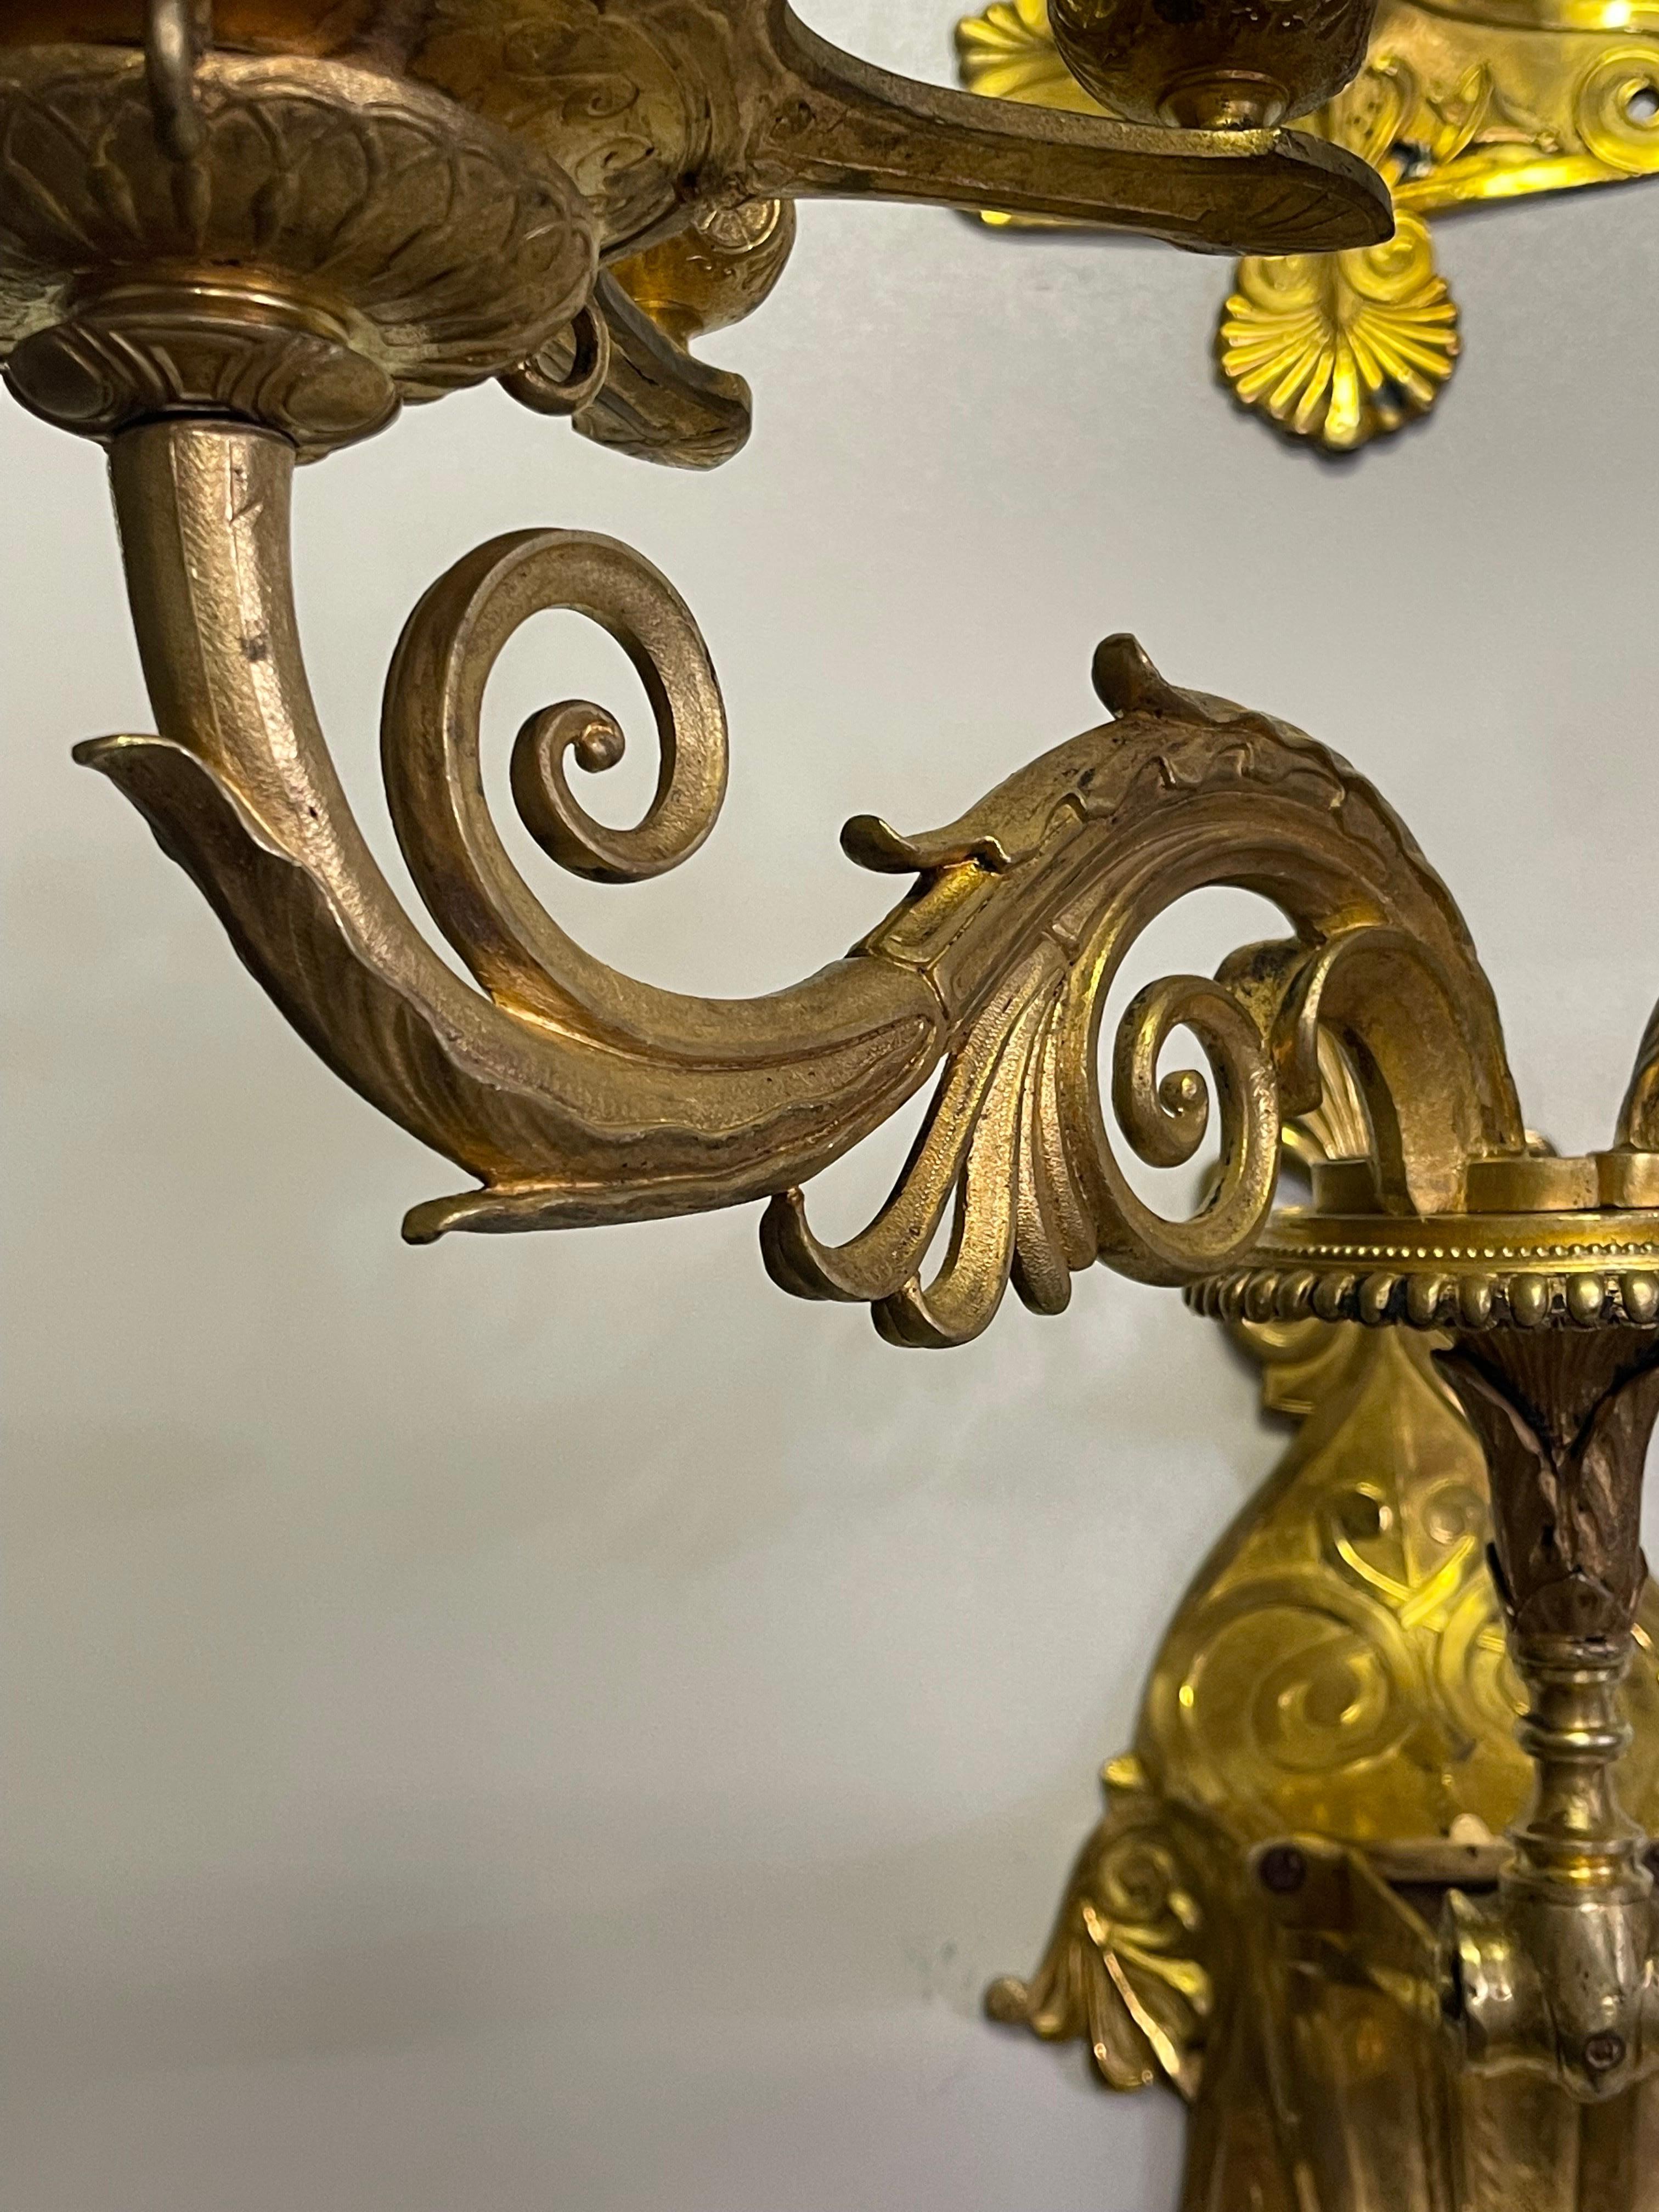 Pair of Stunning Russian Empire Period Ormolu Wall Sconces , ca. 1820s For Sale 5